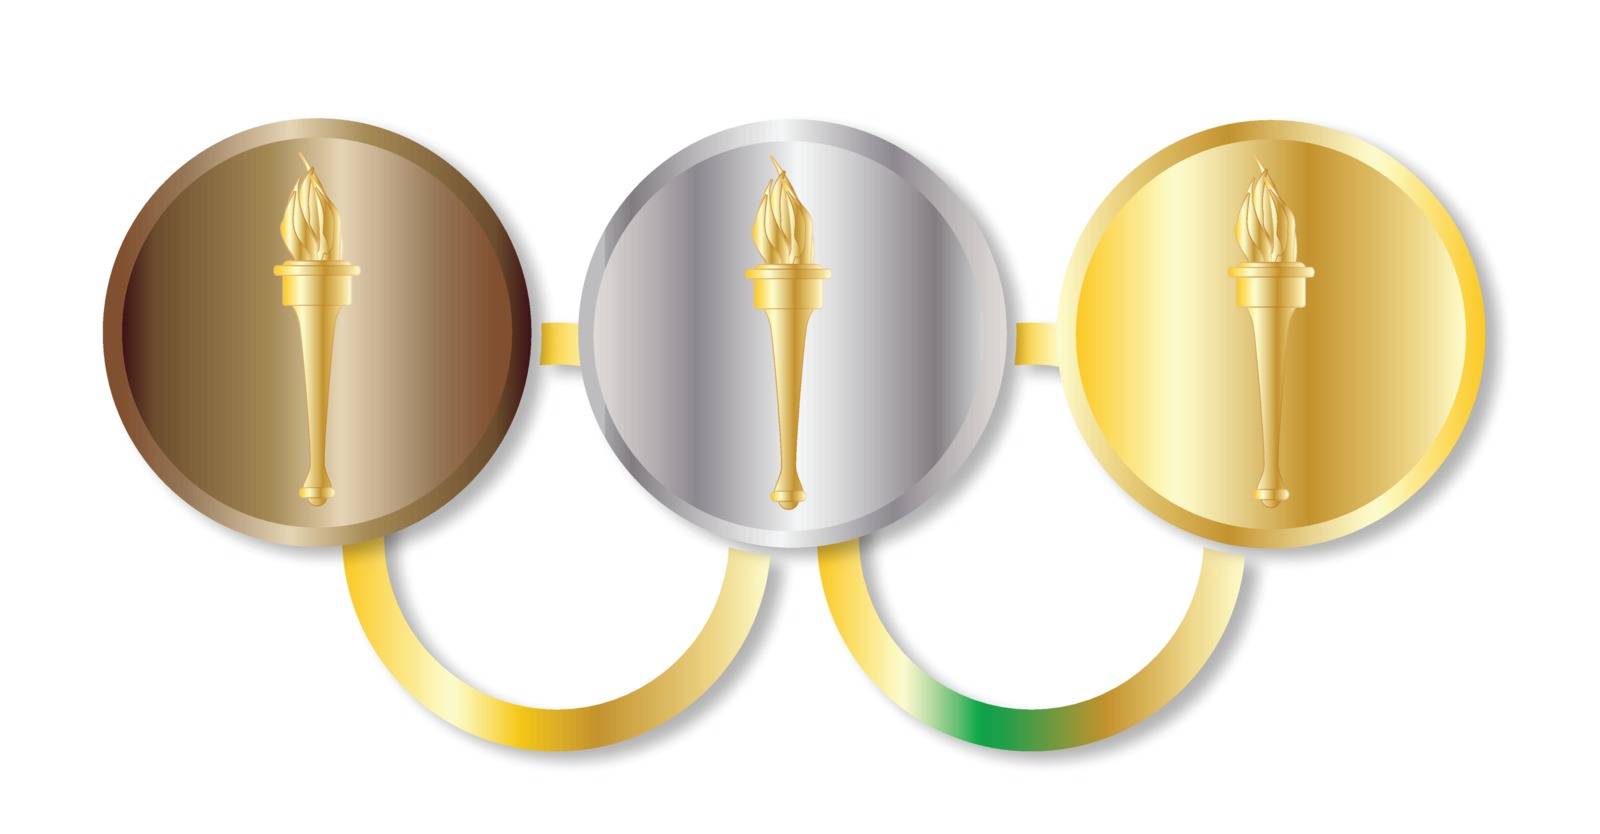 Olympic style rings with medal insets over a white background